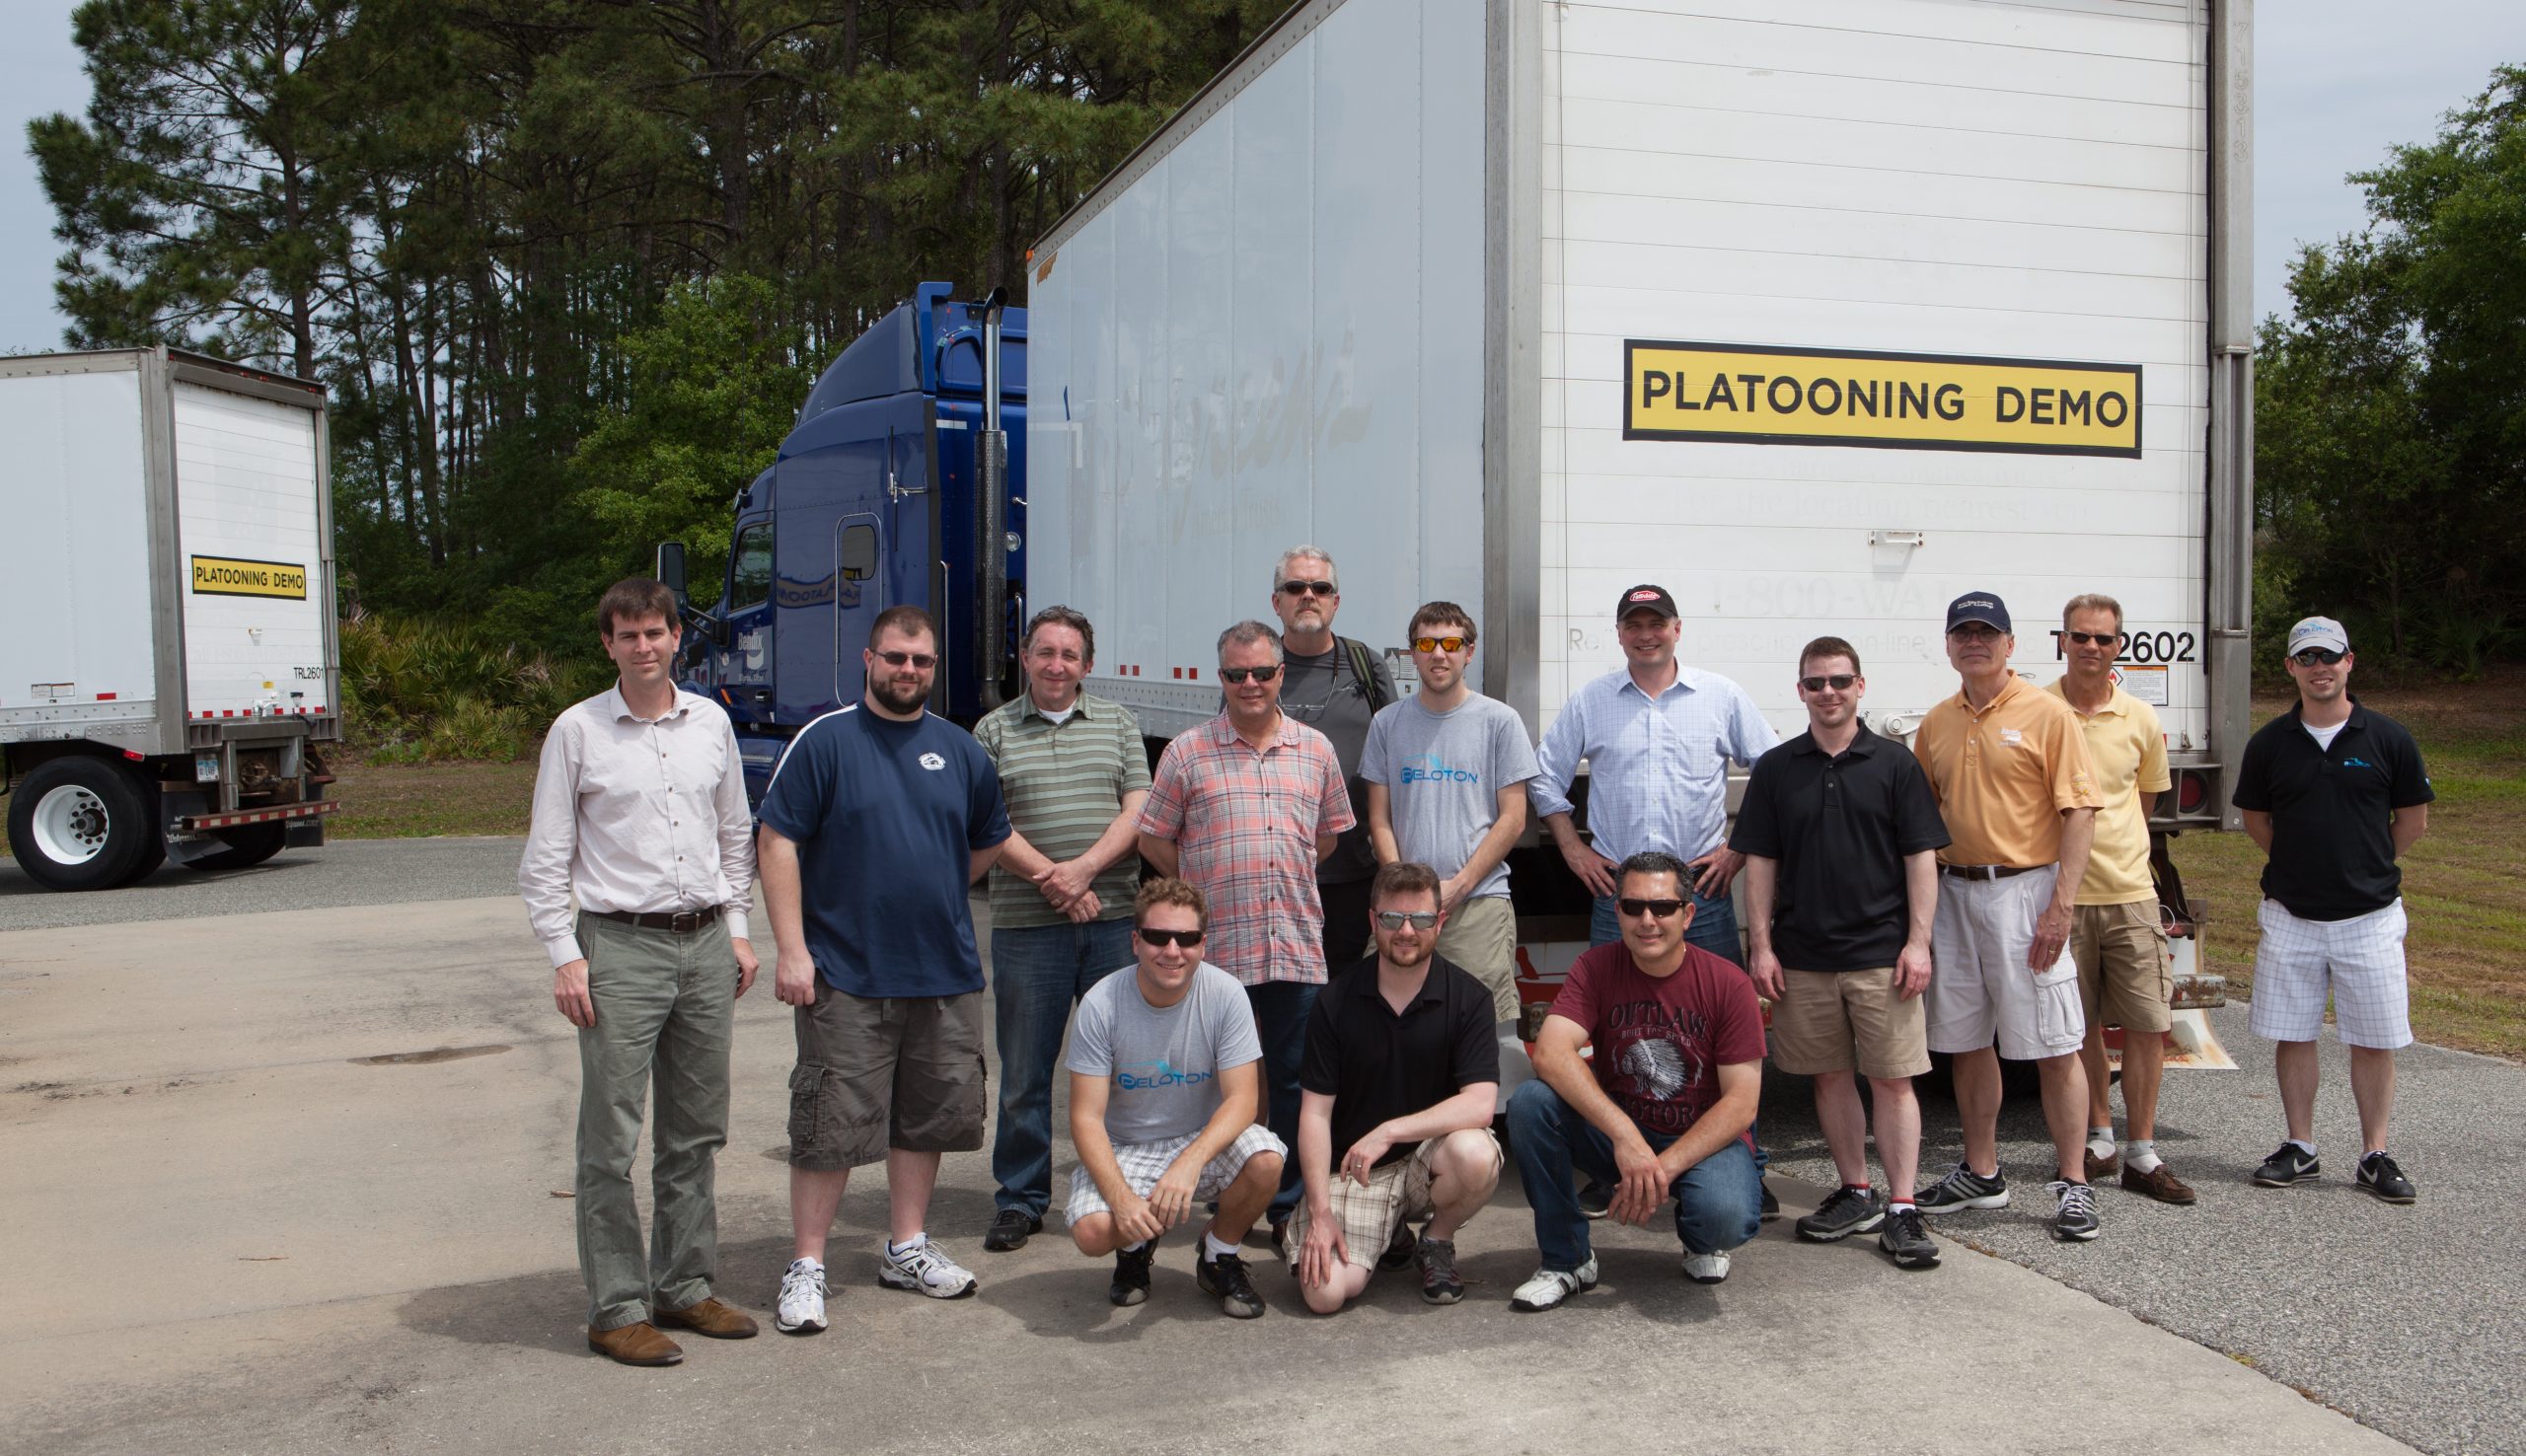 Peloton crew pictured in front of a white trailer at the platooning demo